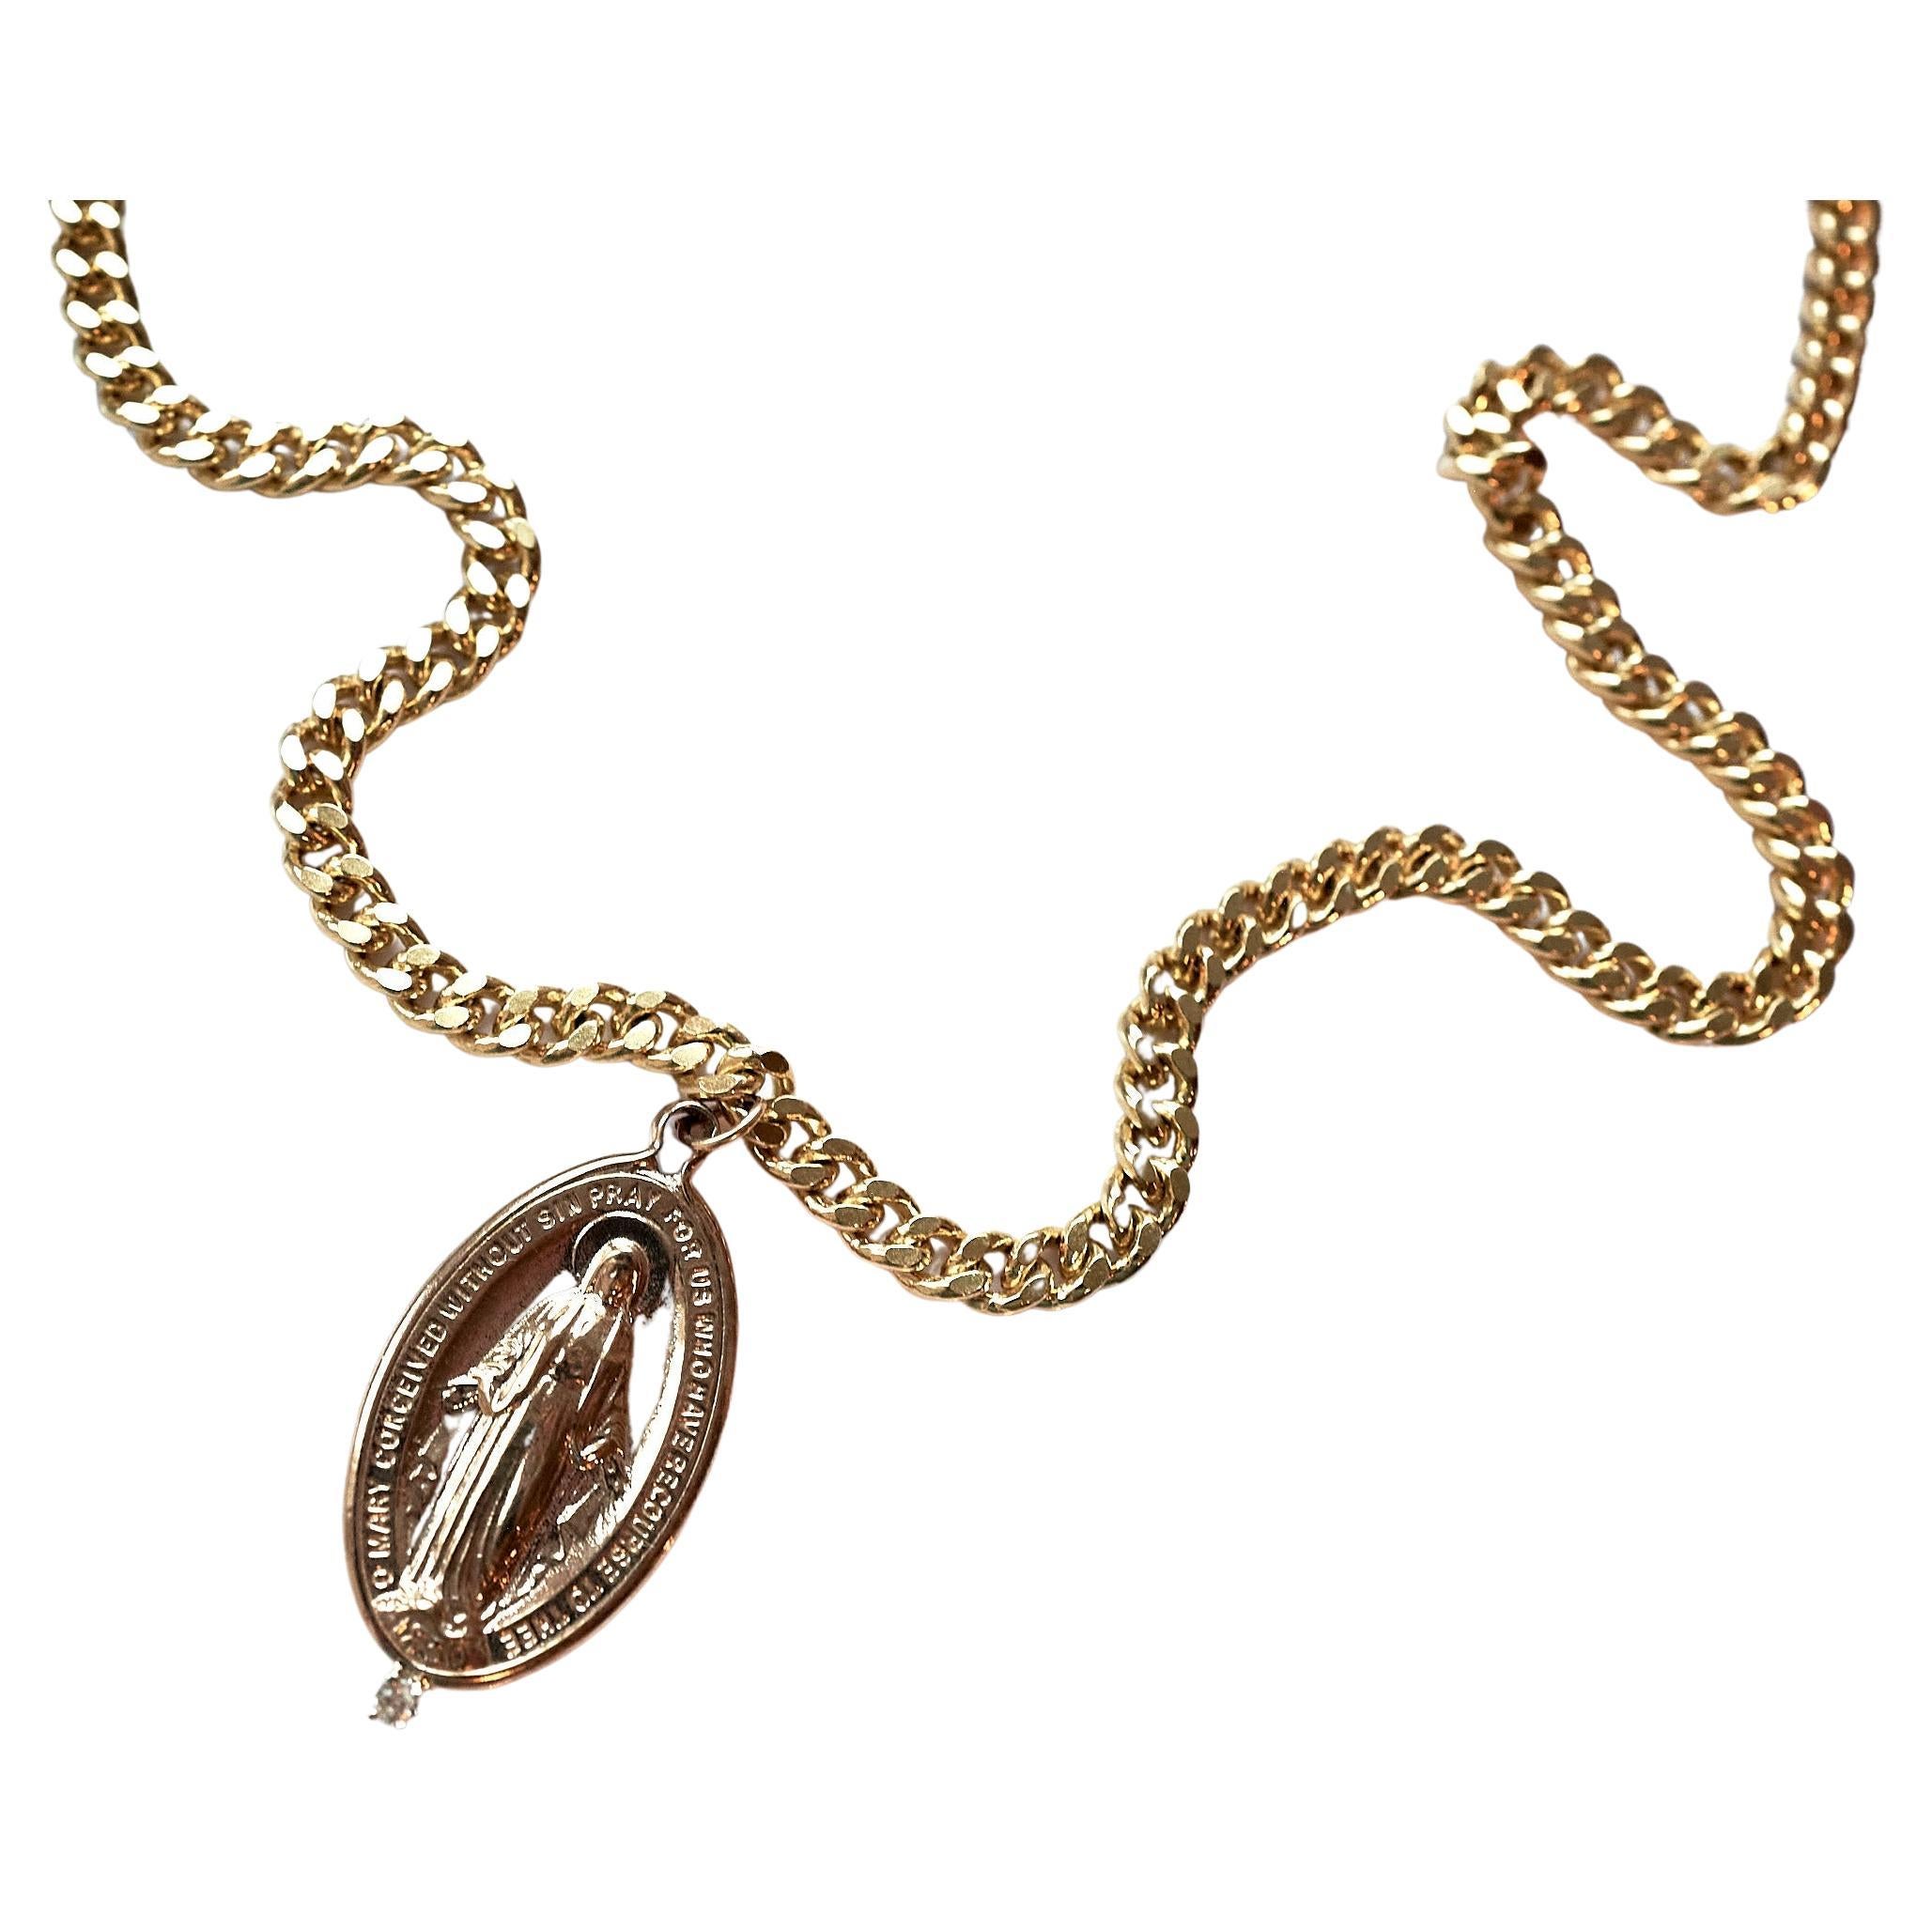 White Diamond Medal Virgin Mary Oval Medal Chain Necklace J Dauphin
Designer: J Dauphin
10k Gold Plated Chain
Medal Bronze

Symbols or medals can become a powerful tool in our arsenal for the spiritual. 
Since ancient times spiritual pendants,